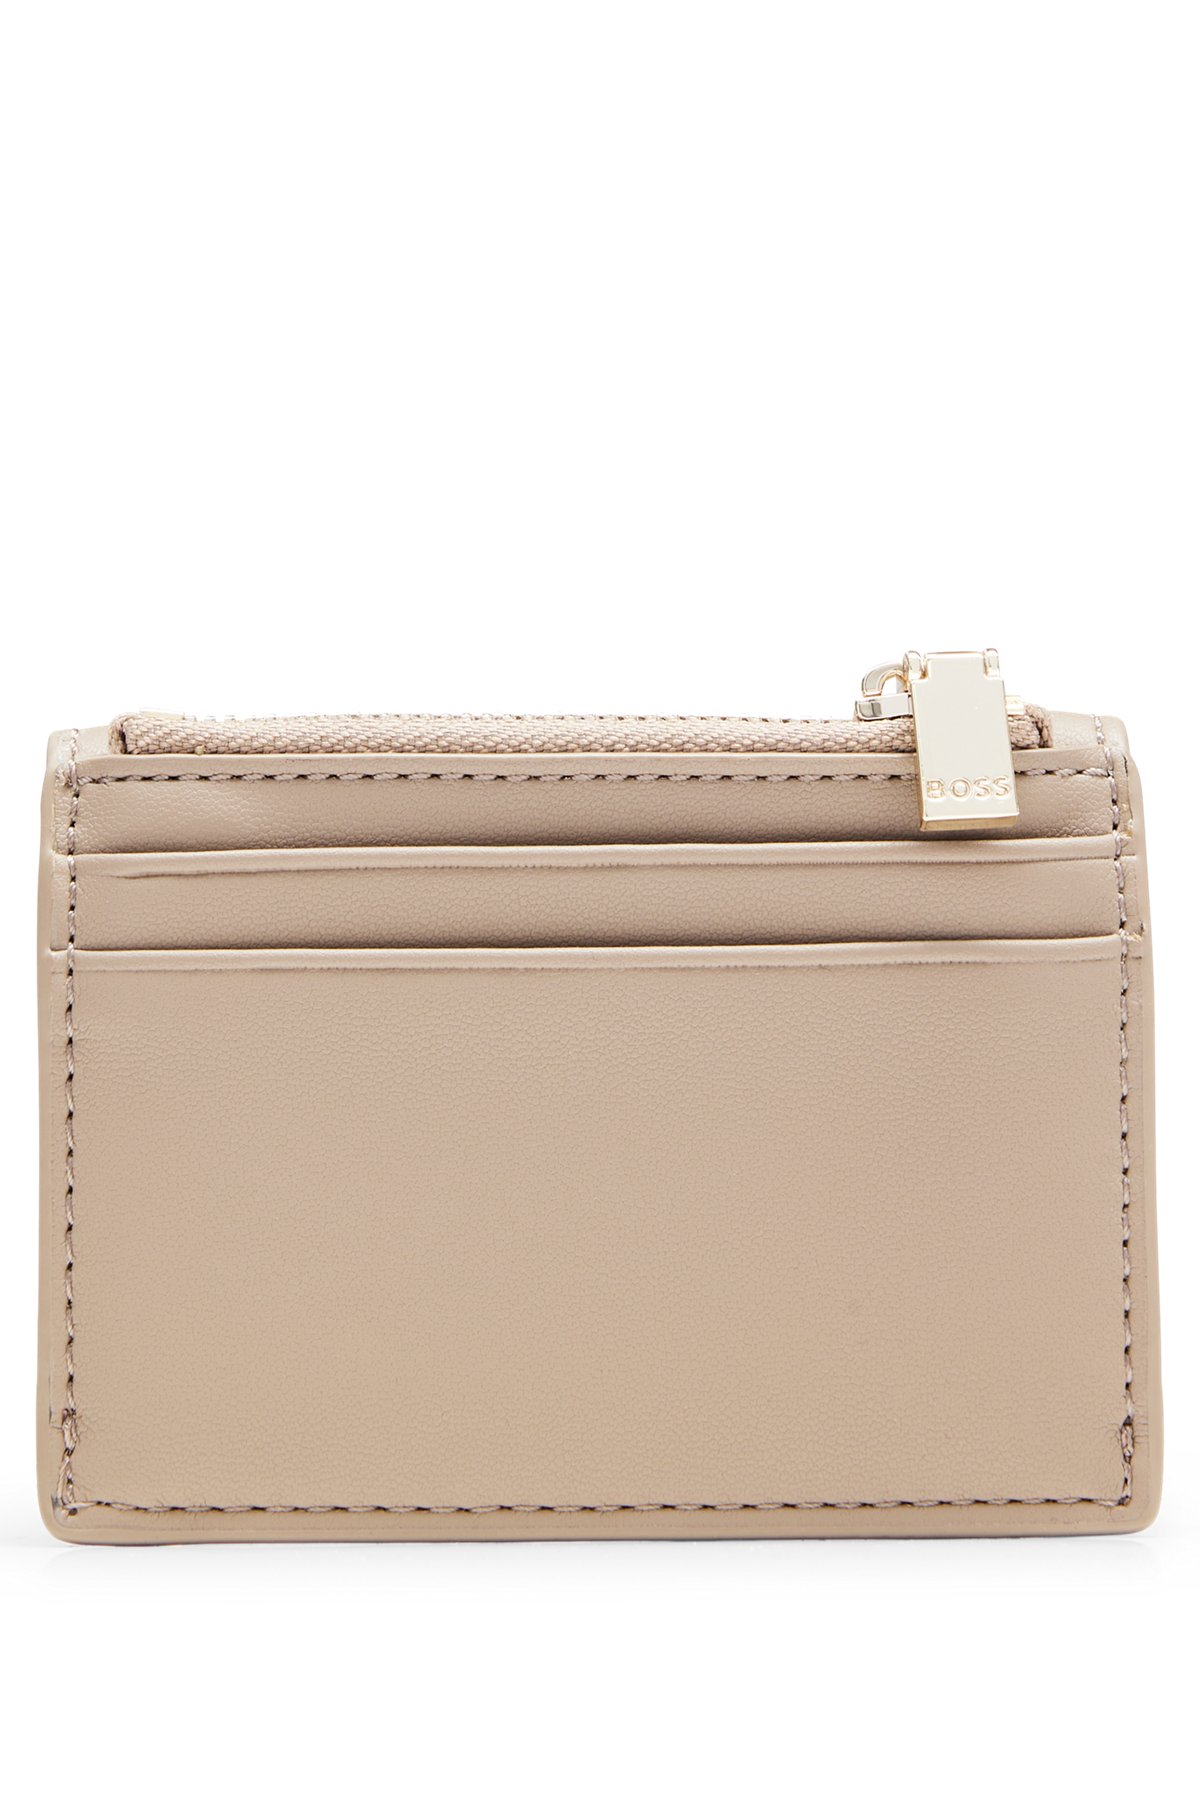 Faux-leather card holder with zipped coin pocket, Light Beige